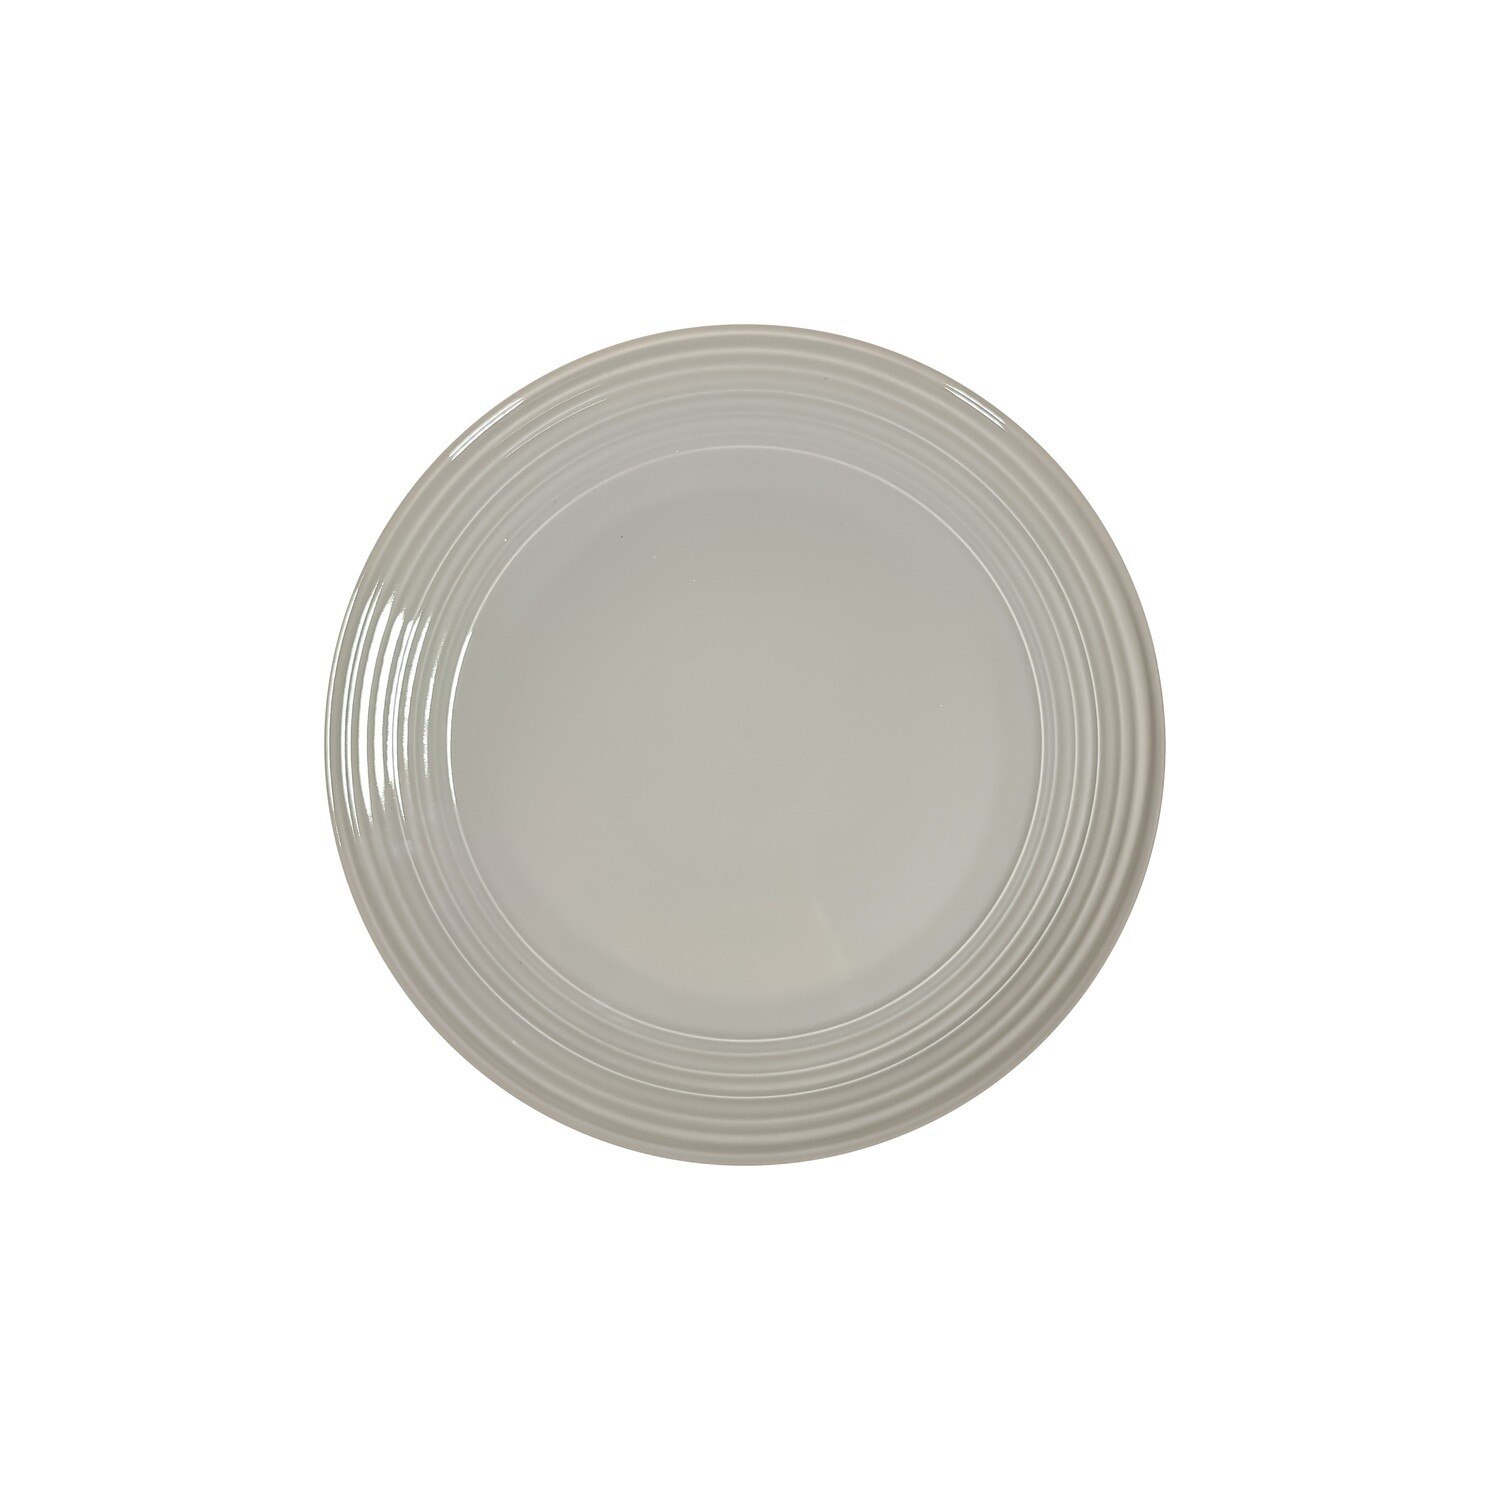 JENNA CLIFFORD - Embossed Lines Light Grey Side Plate